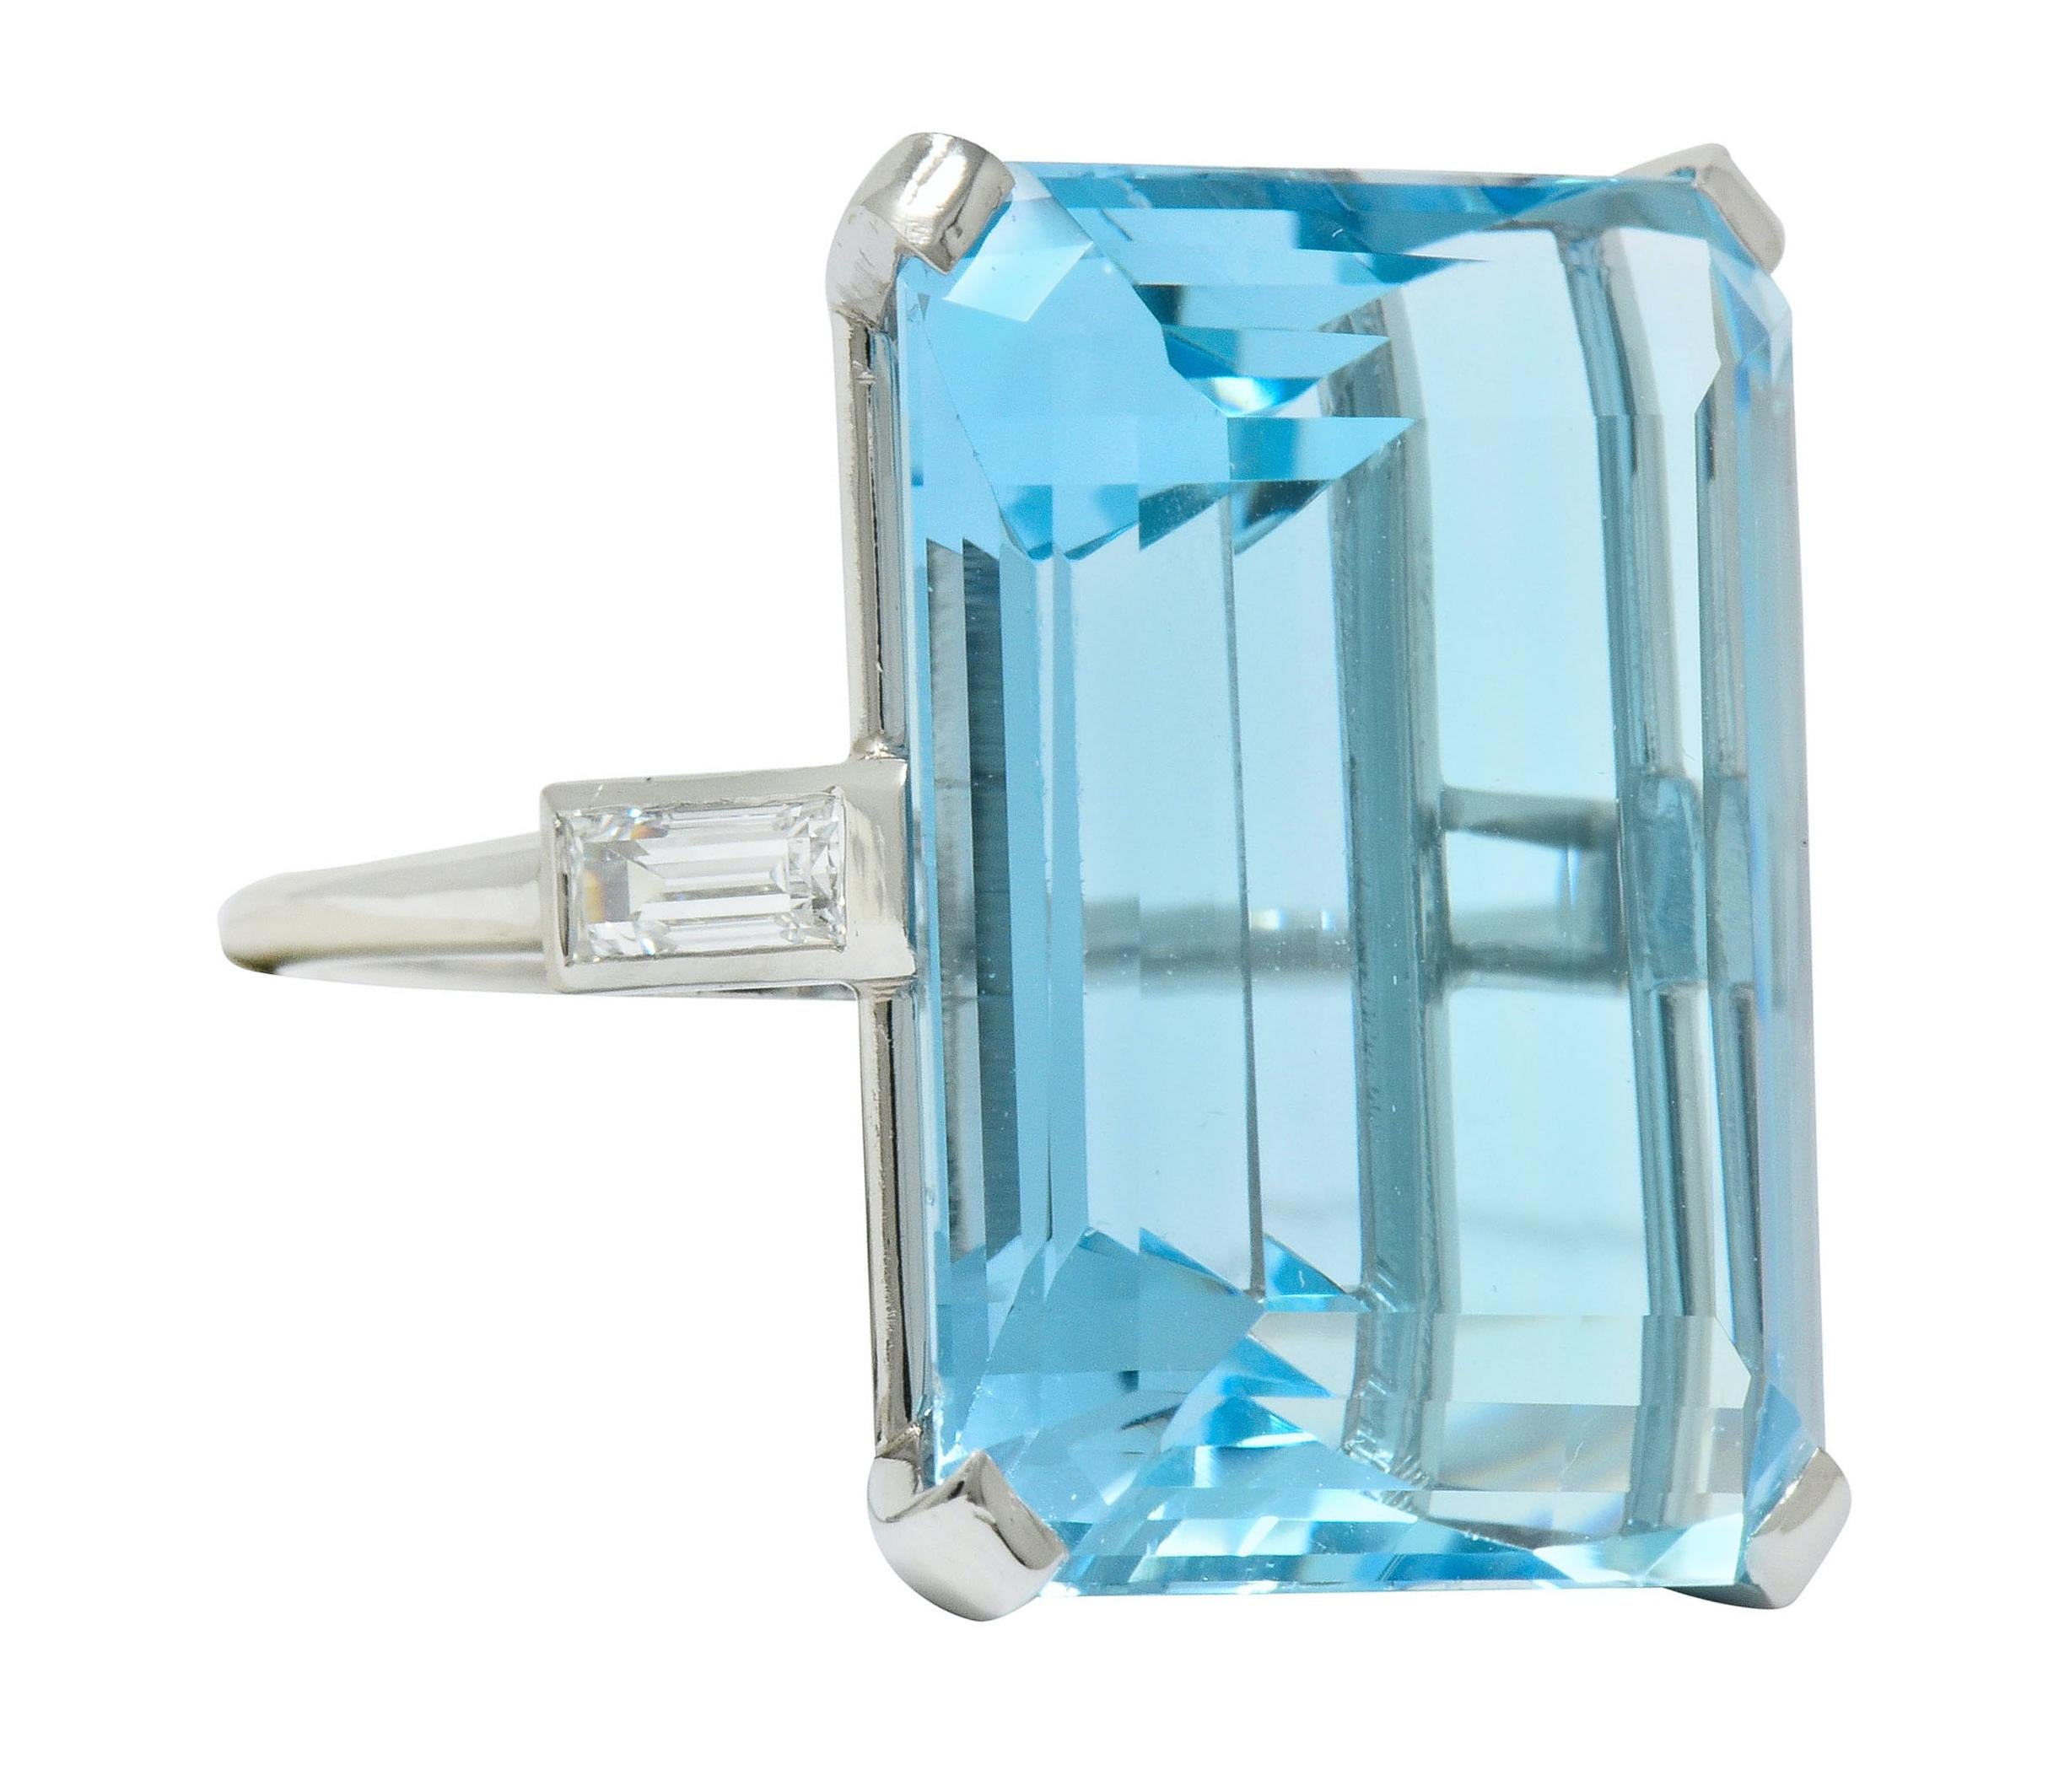 Designed as a cathedral basket style ring centering an emerald cut aquamarine weighing approximately 35.49 carats, transparent and a striking light blue color

Flanked by two baguette cut diamonds, flush set into shoulders, weighing approximately